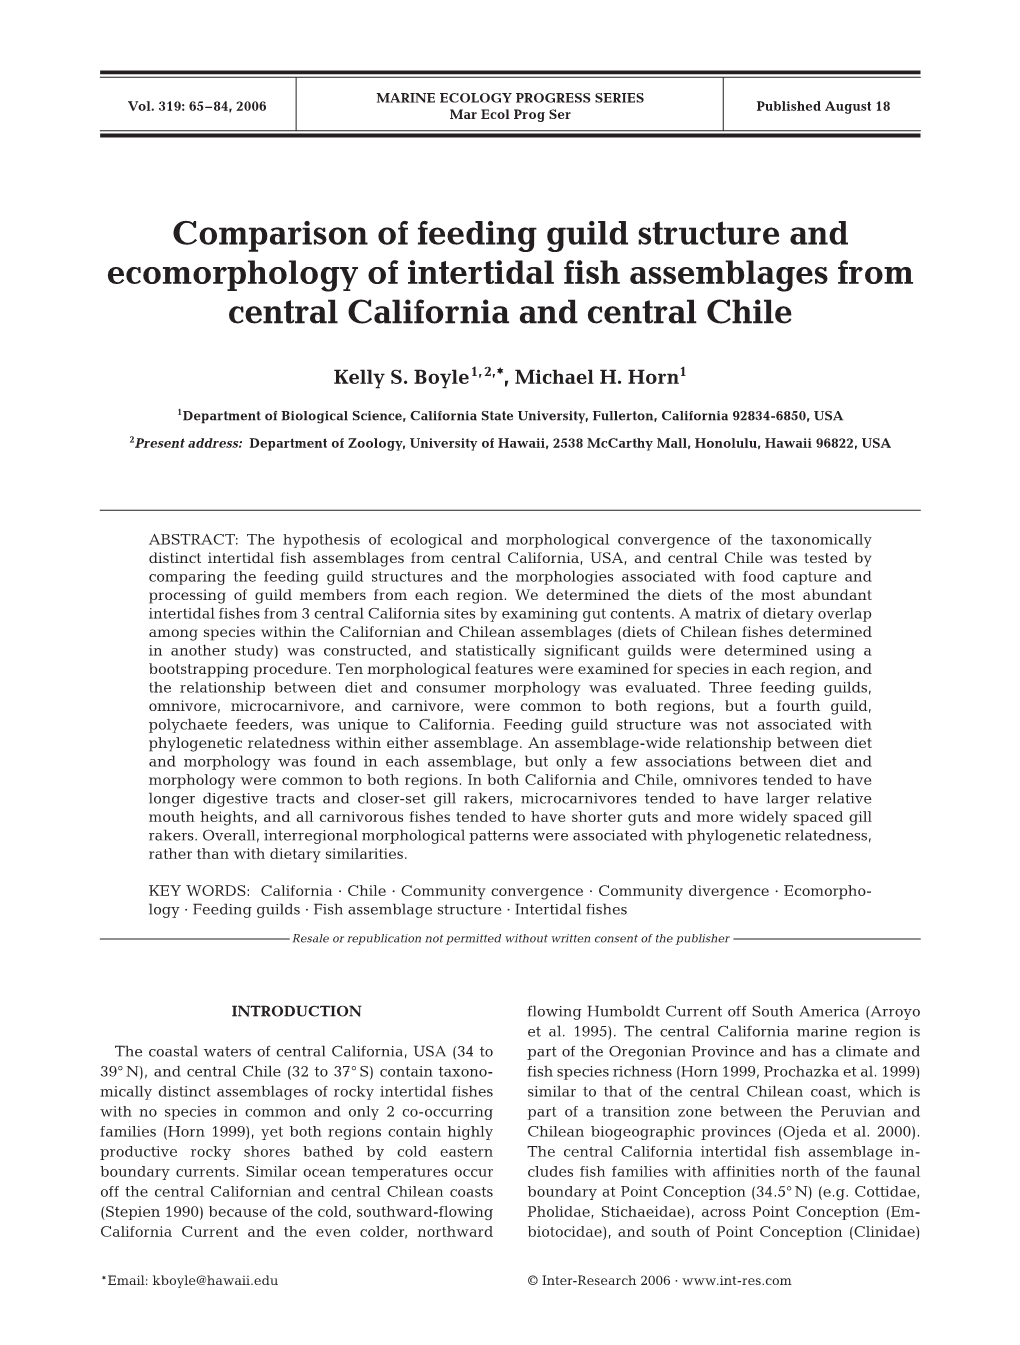 Comparison of Feeding Guild Structure and Ecomorphology of Intertidal Fish Assemblages from Central California and Central Chile